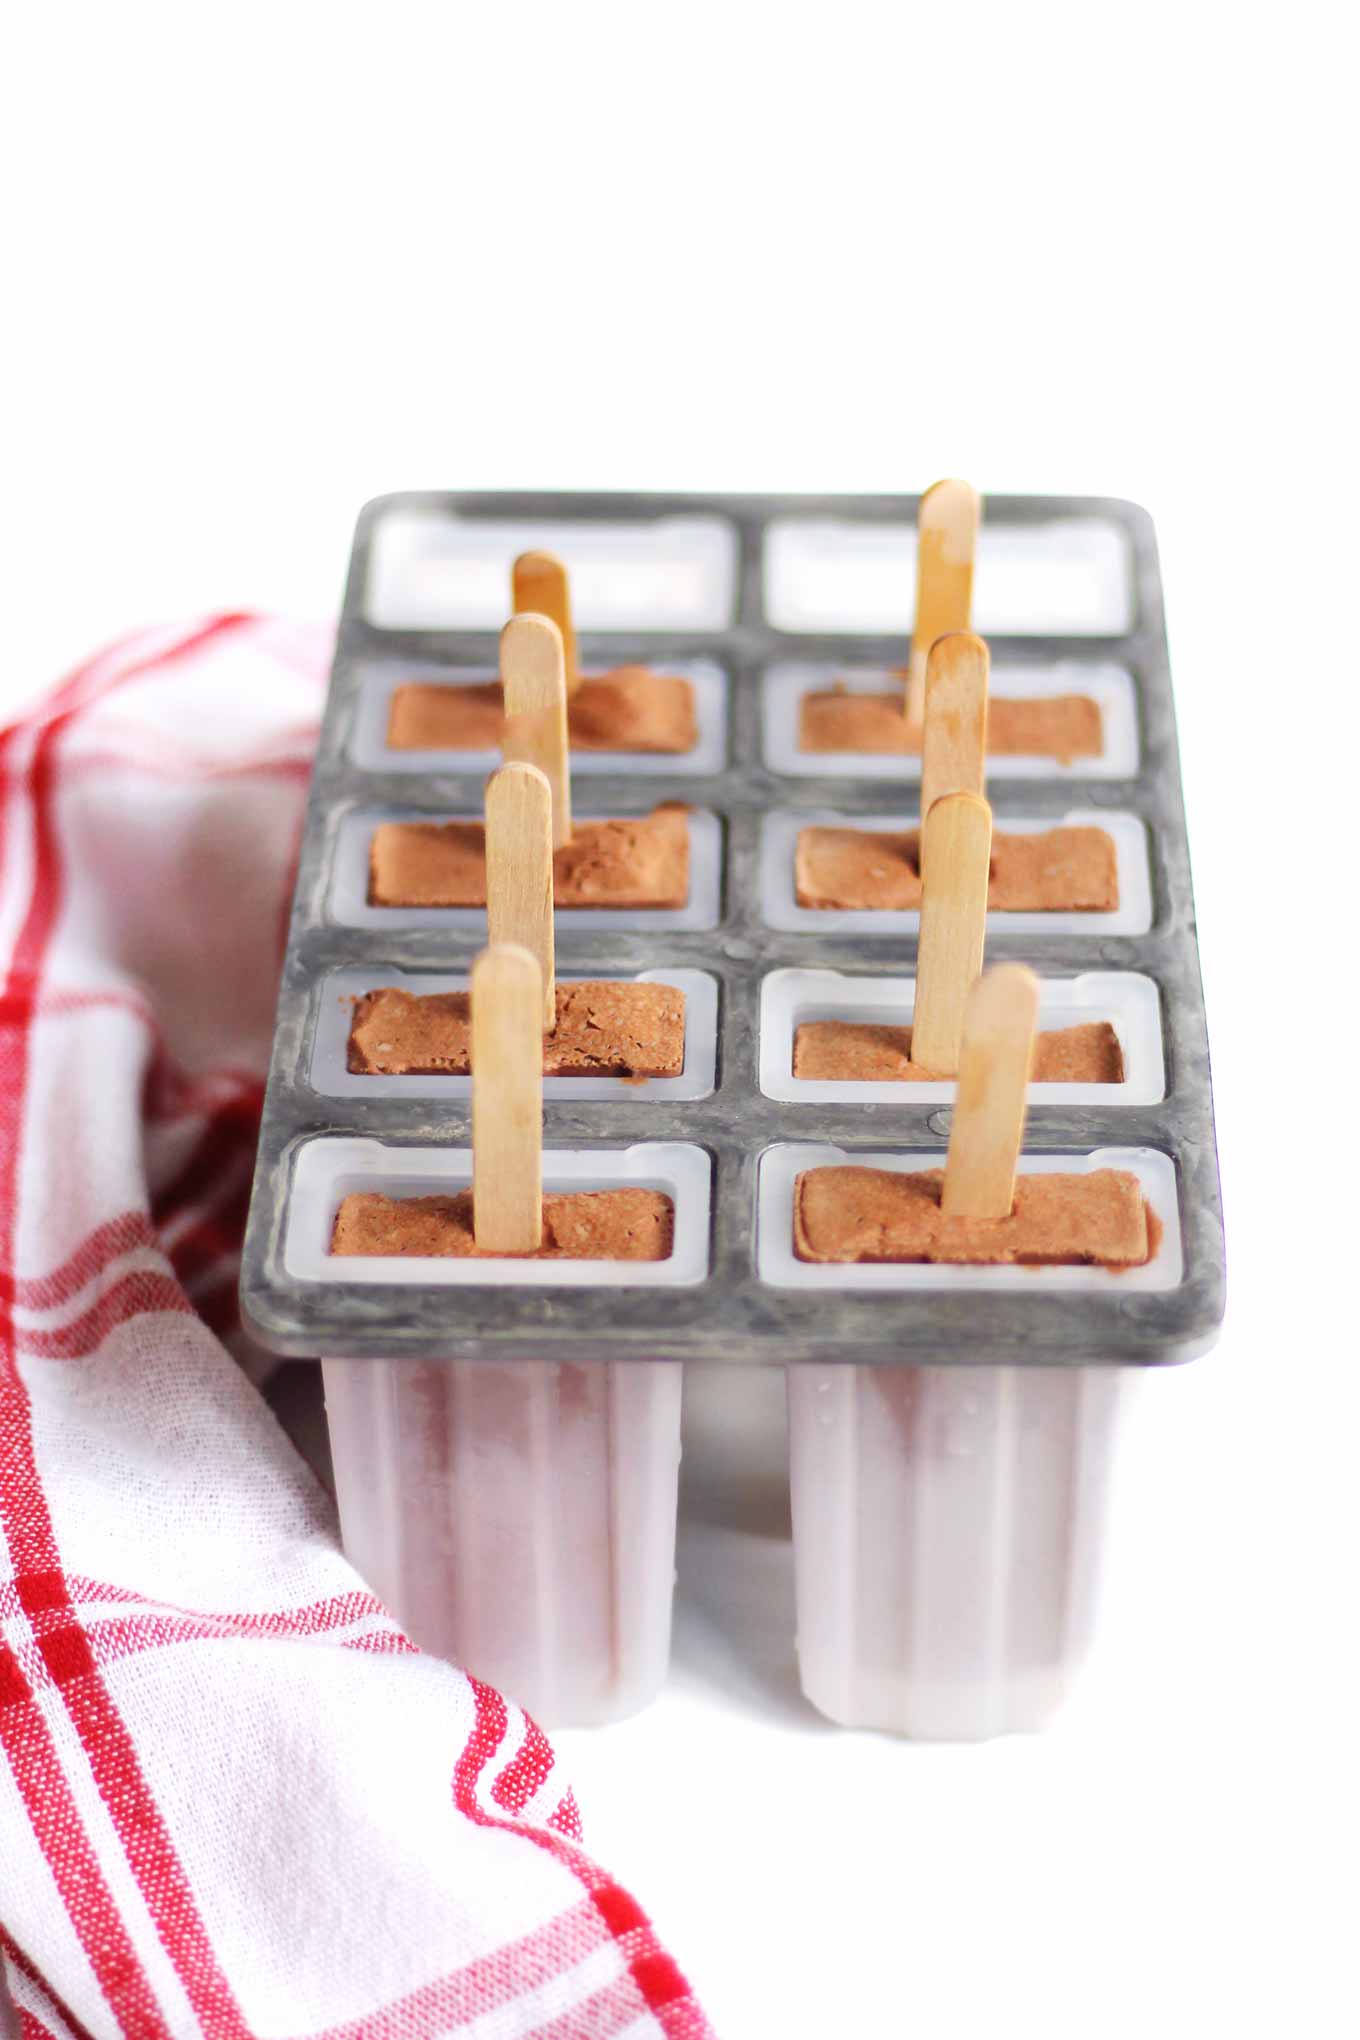 fudge pops in a popsicle mold